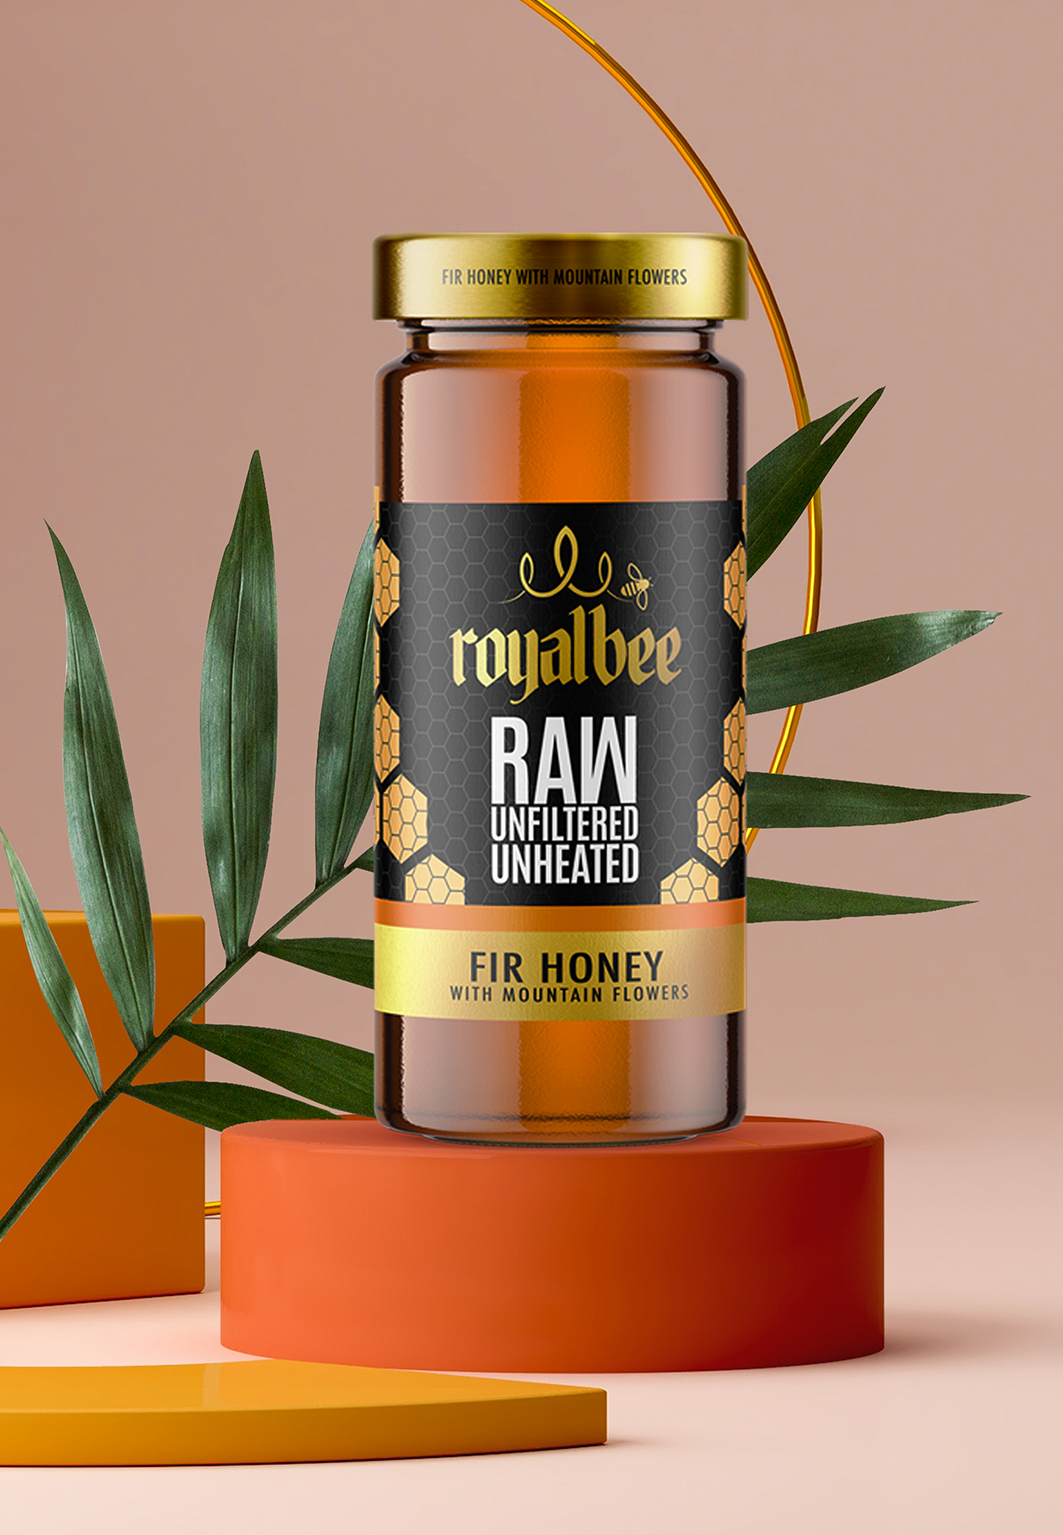 The packaging design for Royal Bee Honey by Green Fields in London was created with a color scheme that reflects the natural beauty of the product. The use of black, gold, white, and orange was chosen to complement the various honey colors. This design choice not only adds visual appeal, but it also communicates the premium quality of the product. Additionally, a gift box was created to showcase two different honey flavors and include a honey dripper, providing a complete and thoughtful experience for the customer. Overall, this packaging design captures the essence of the brand and the product it represents, effectively communicating its quality and value to potential buyers.